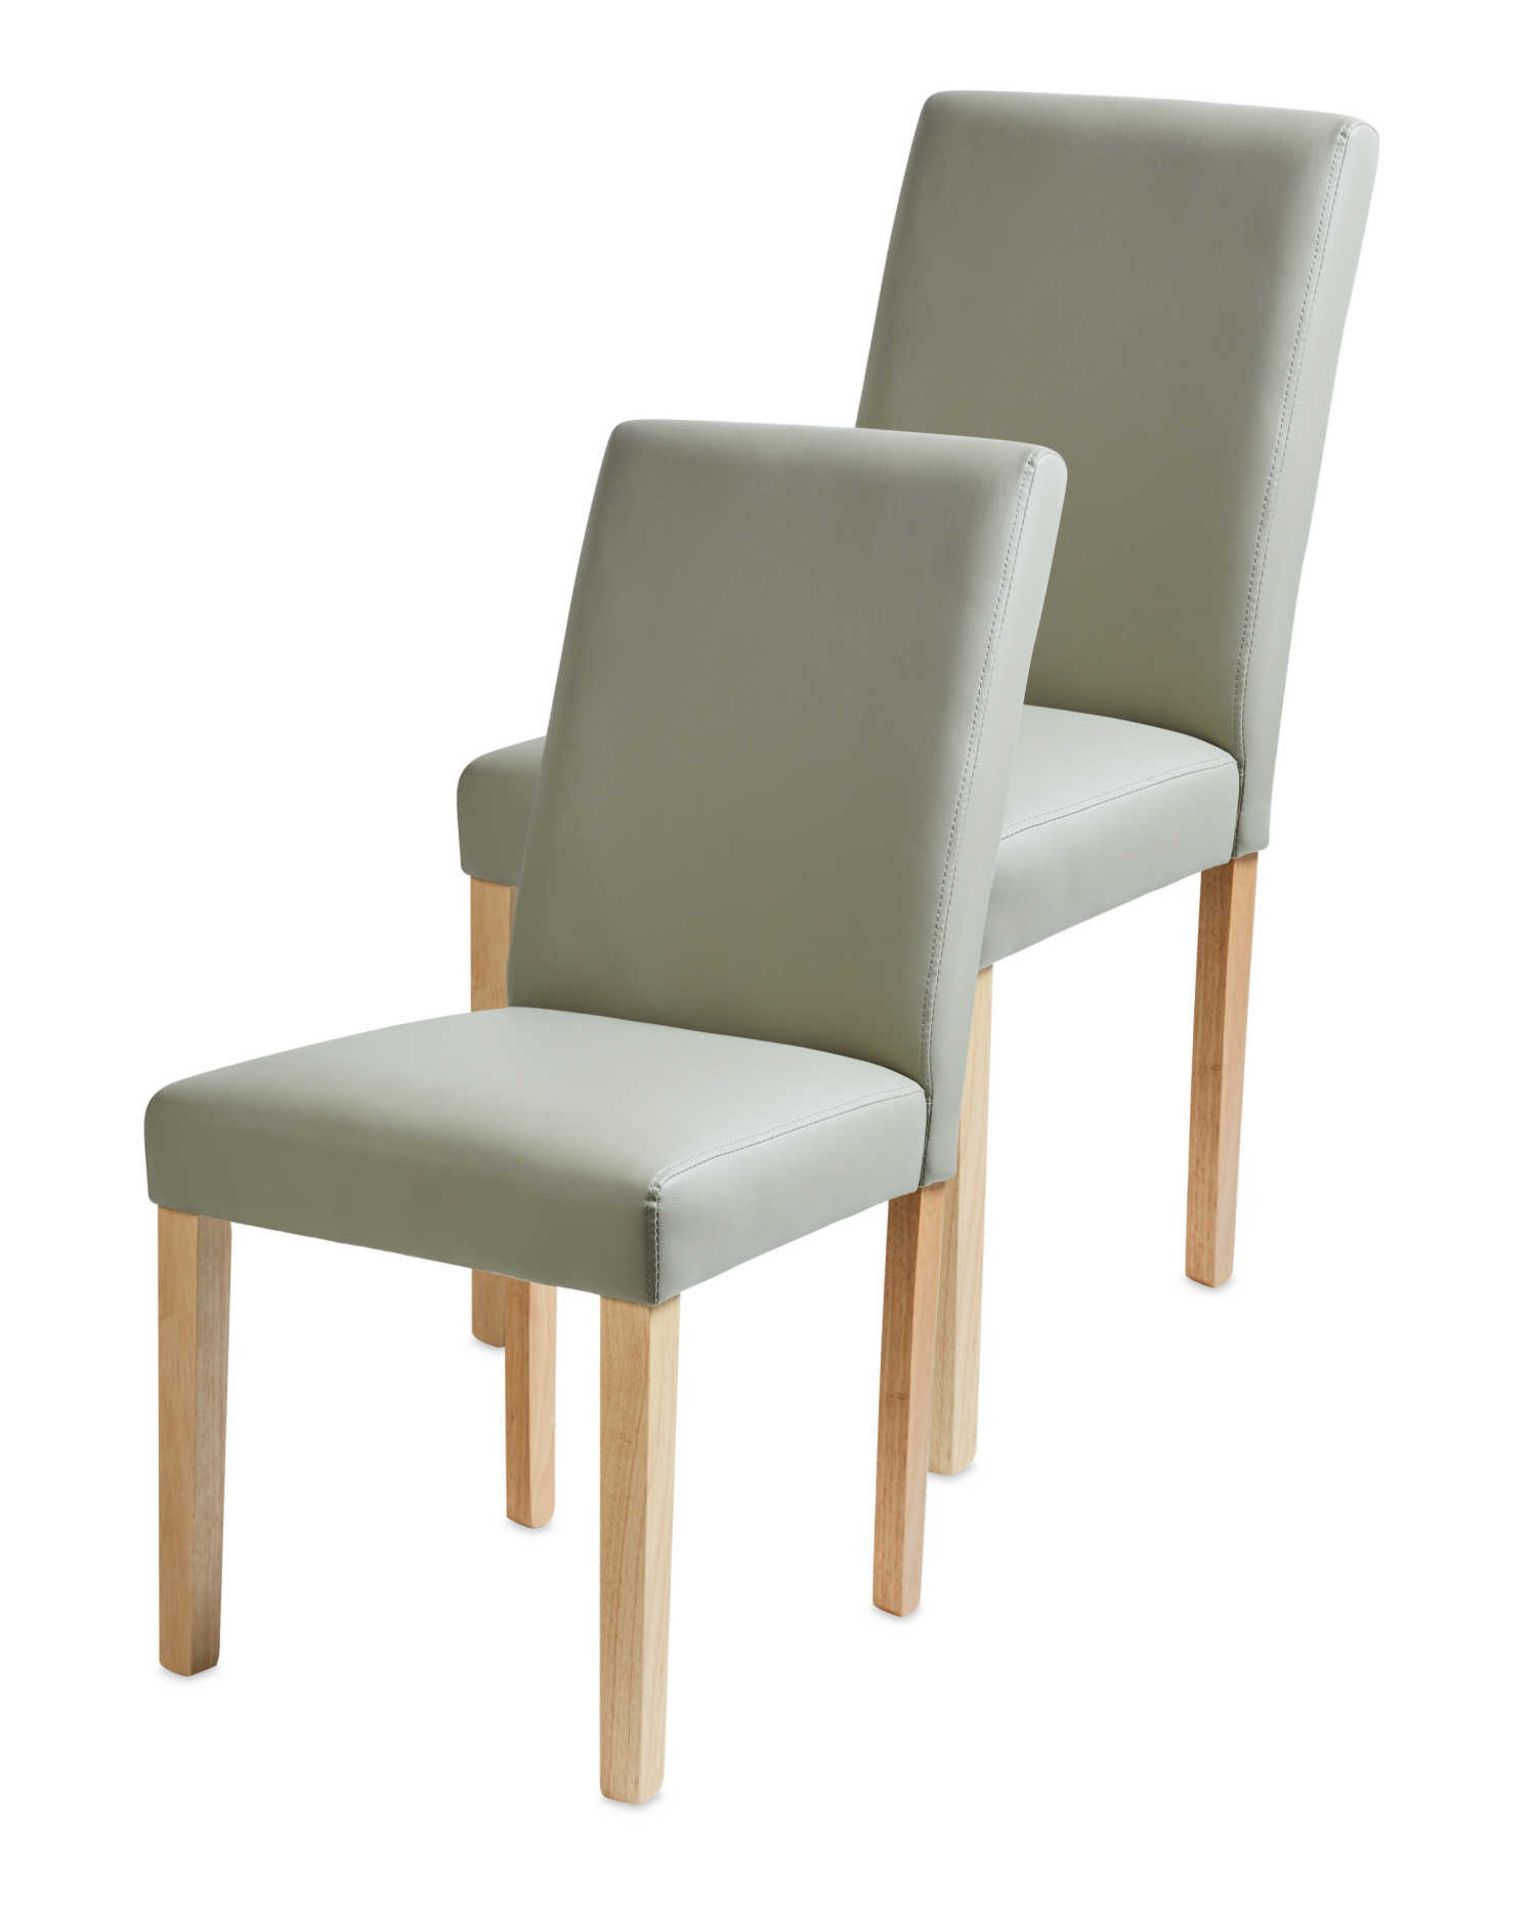 Set of 2 Grey Dining Chairs. Whether you're looking for brand new furniture, or a couple of extra